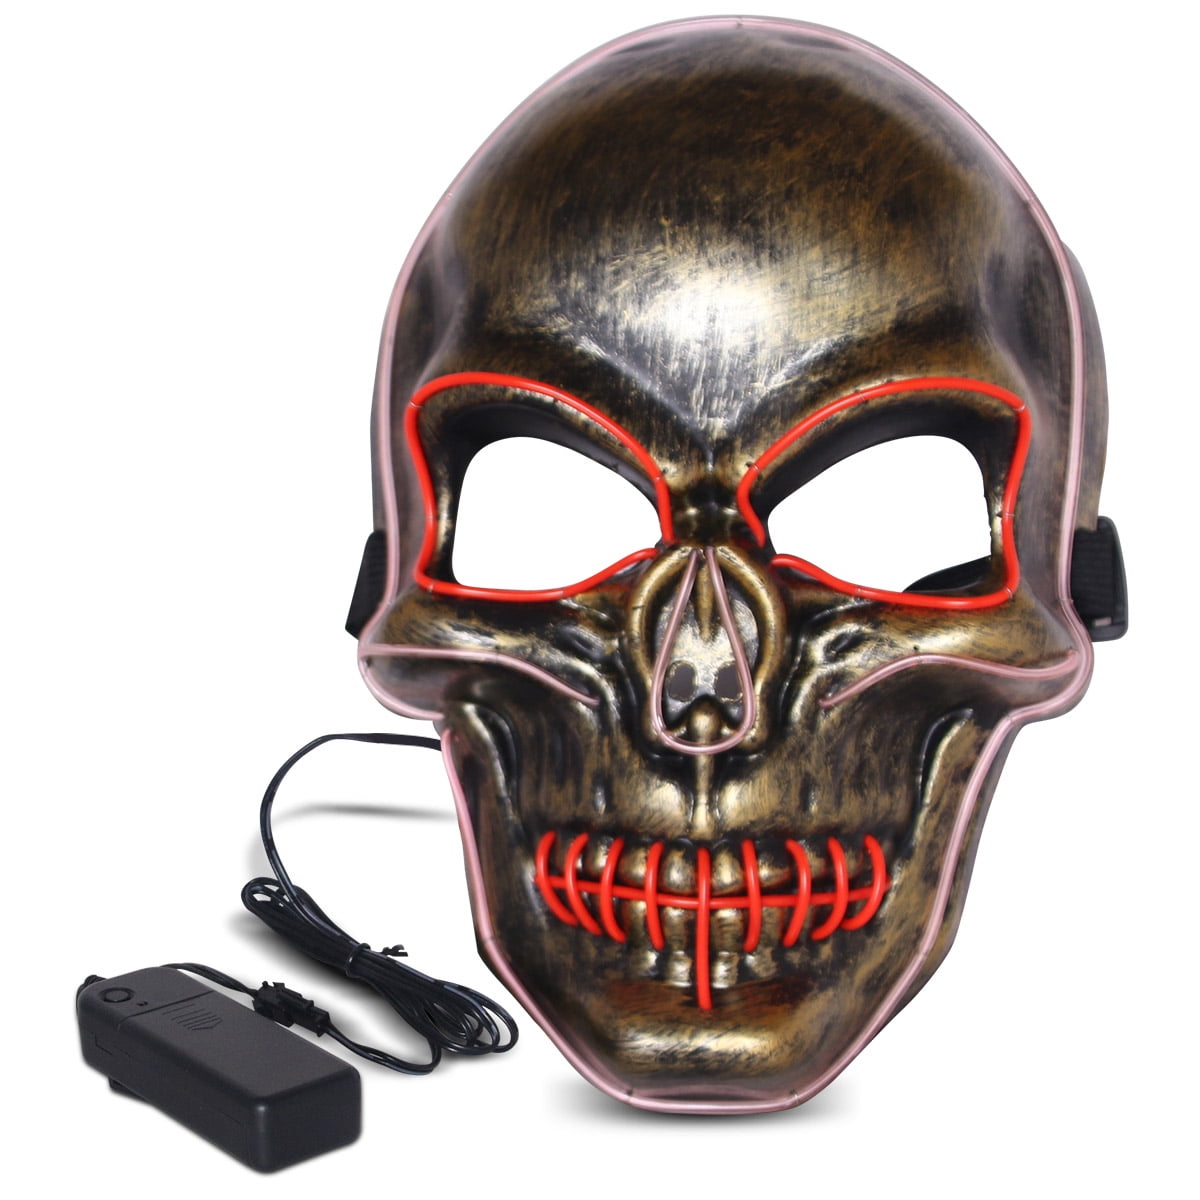 ILEBYGO LED Halloween Mask Light Up Scary Mask Purge Mask with EL Wire 3 Flashing-Modes for Halloween Festival 3 Colors 